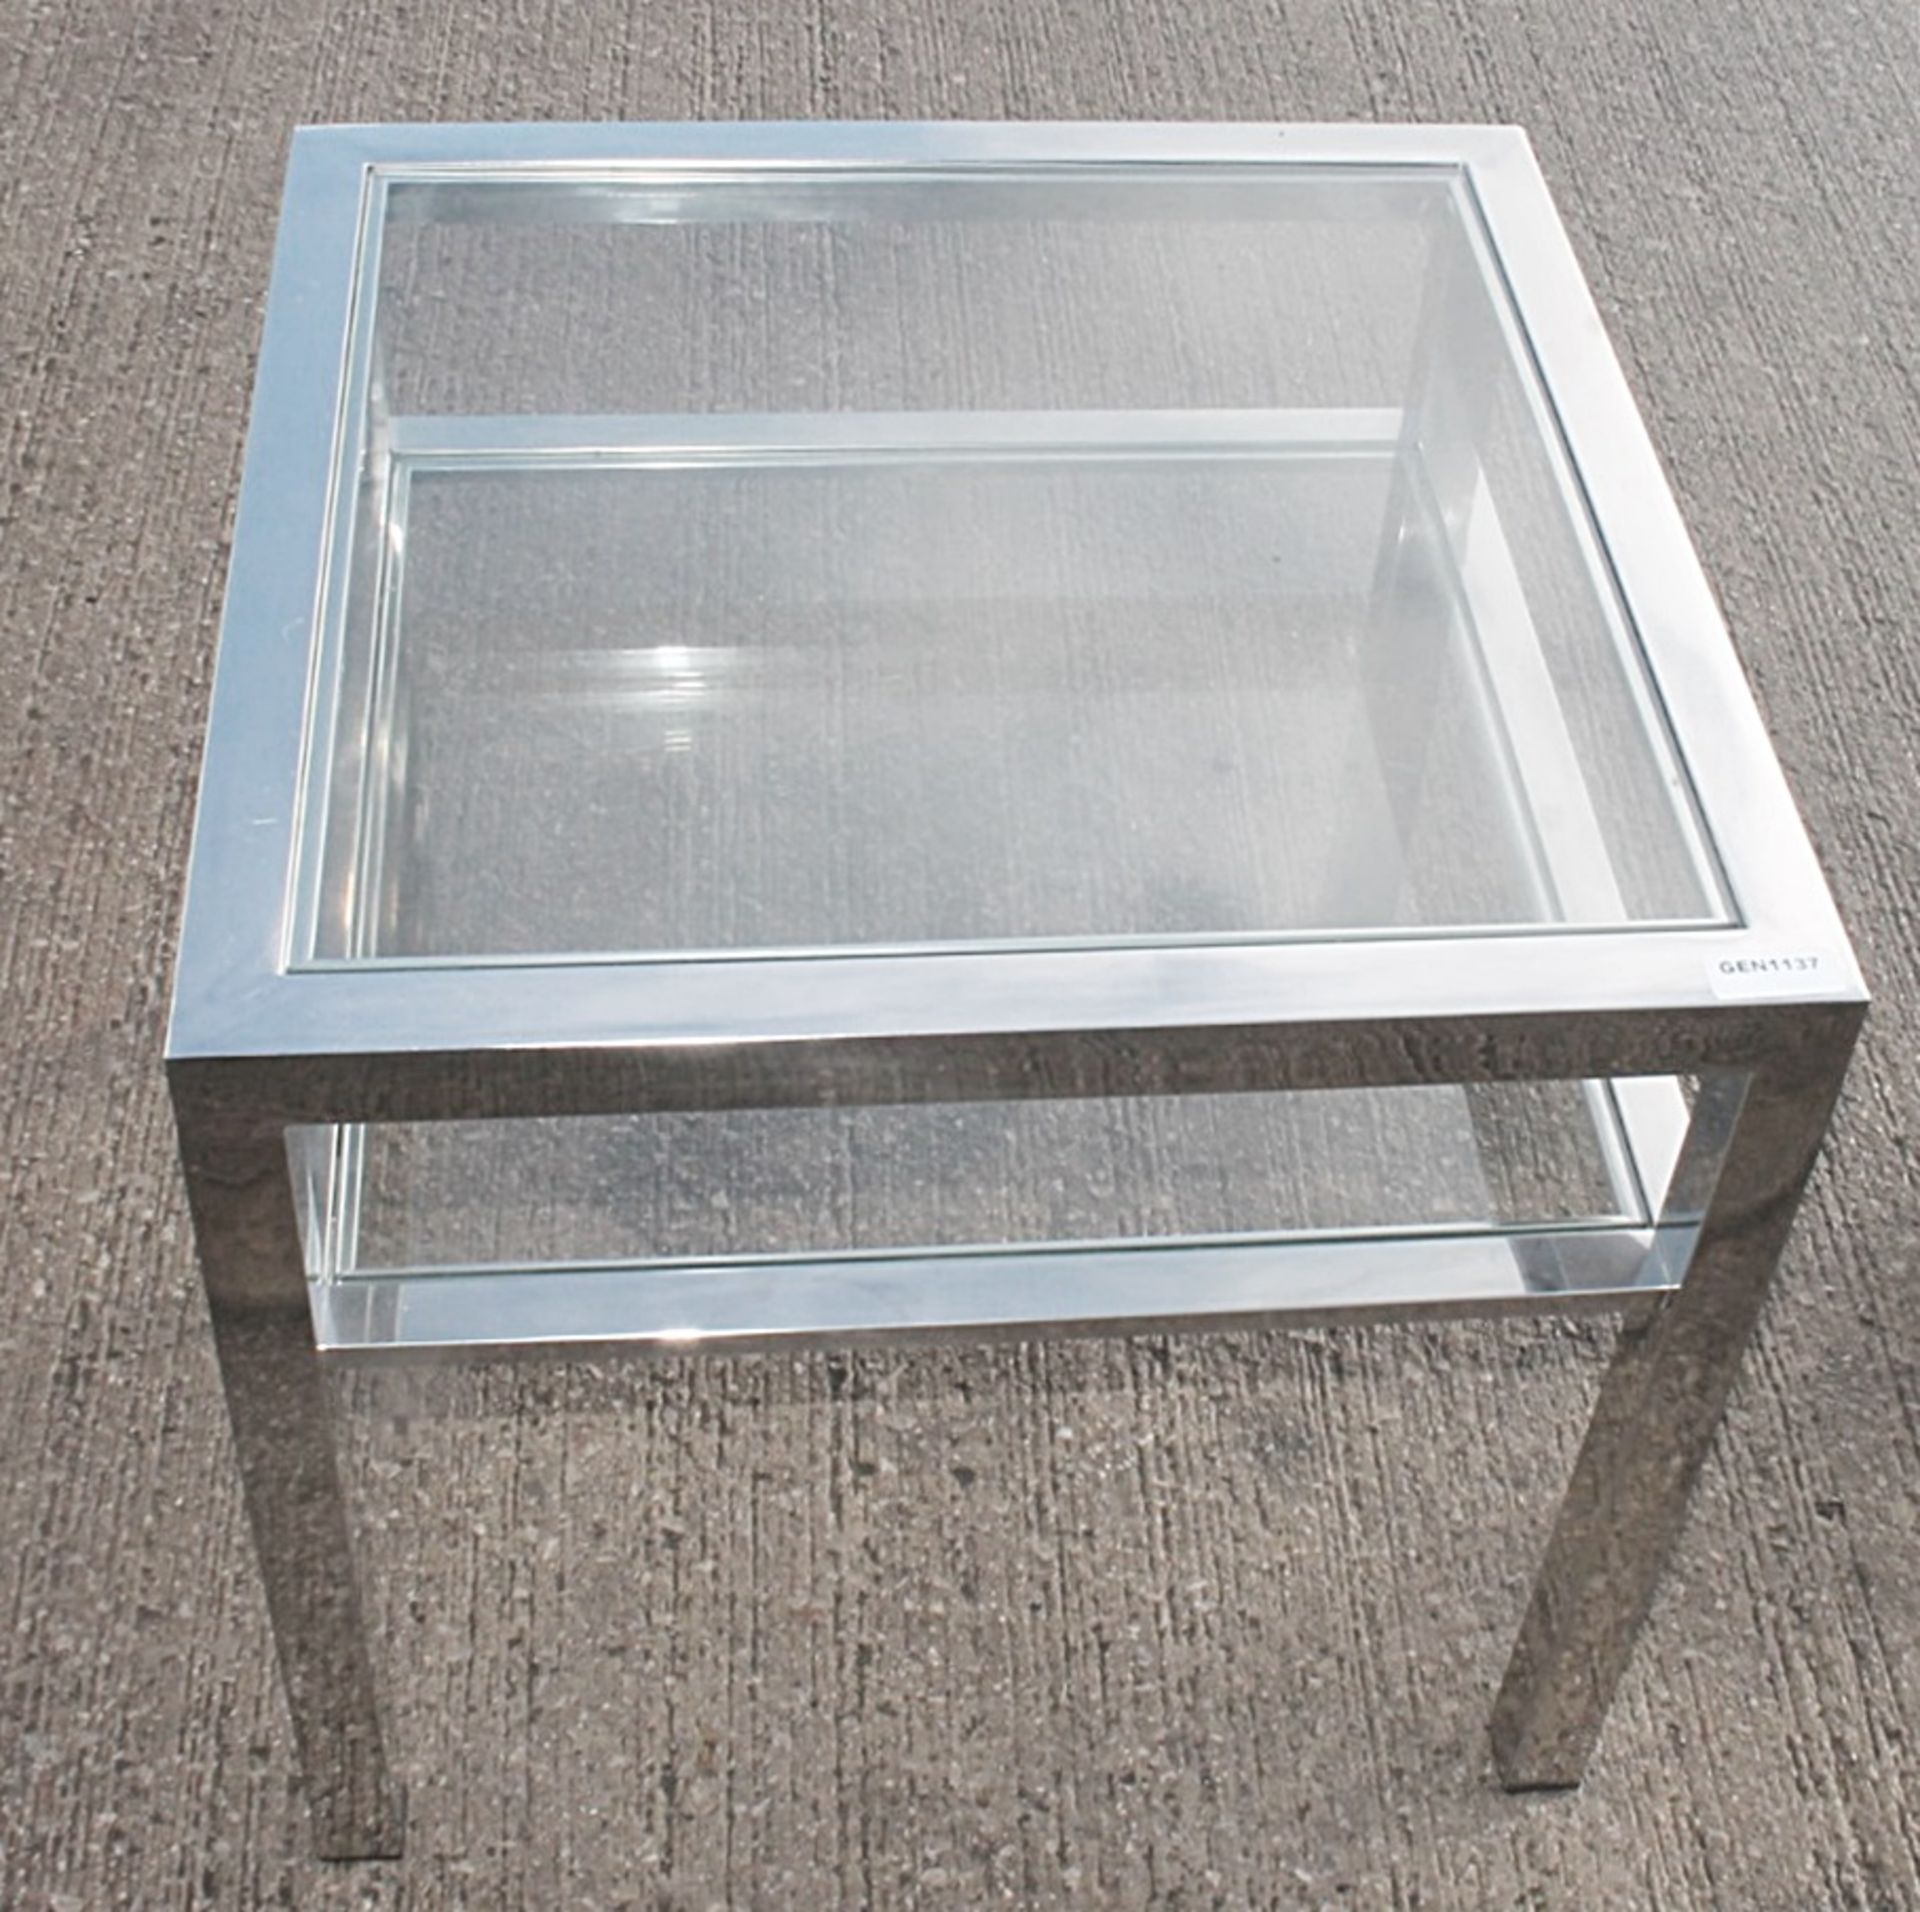 1 x Glass And Chrome Square Side Table - Original Price £200.00 - Image 2 of 3